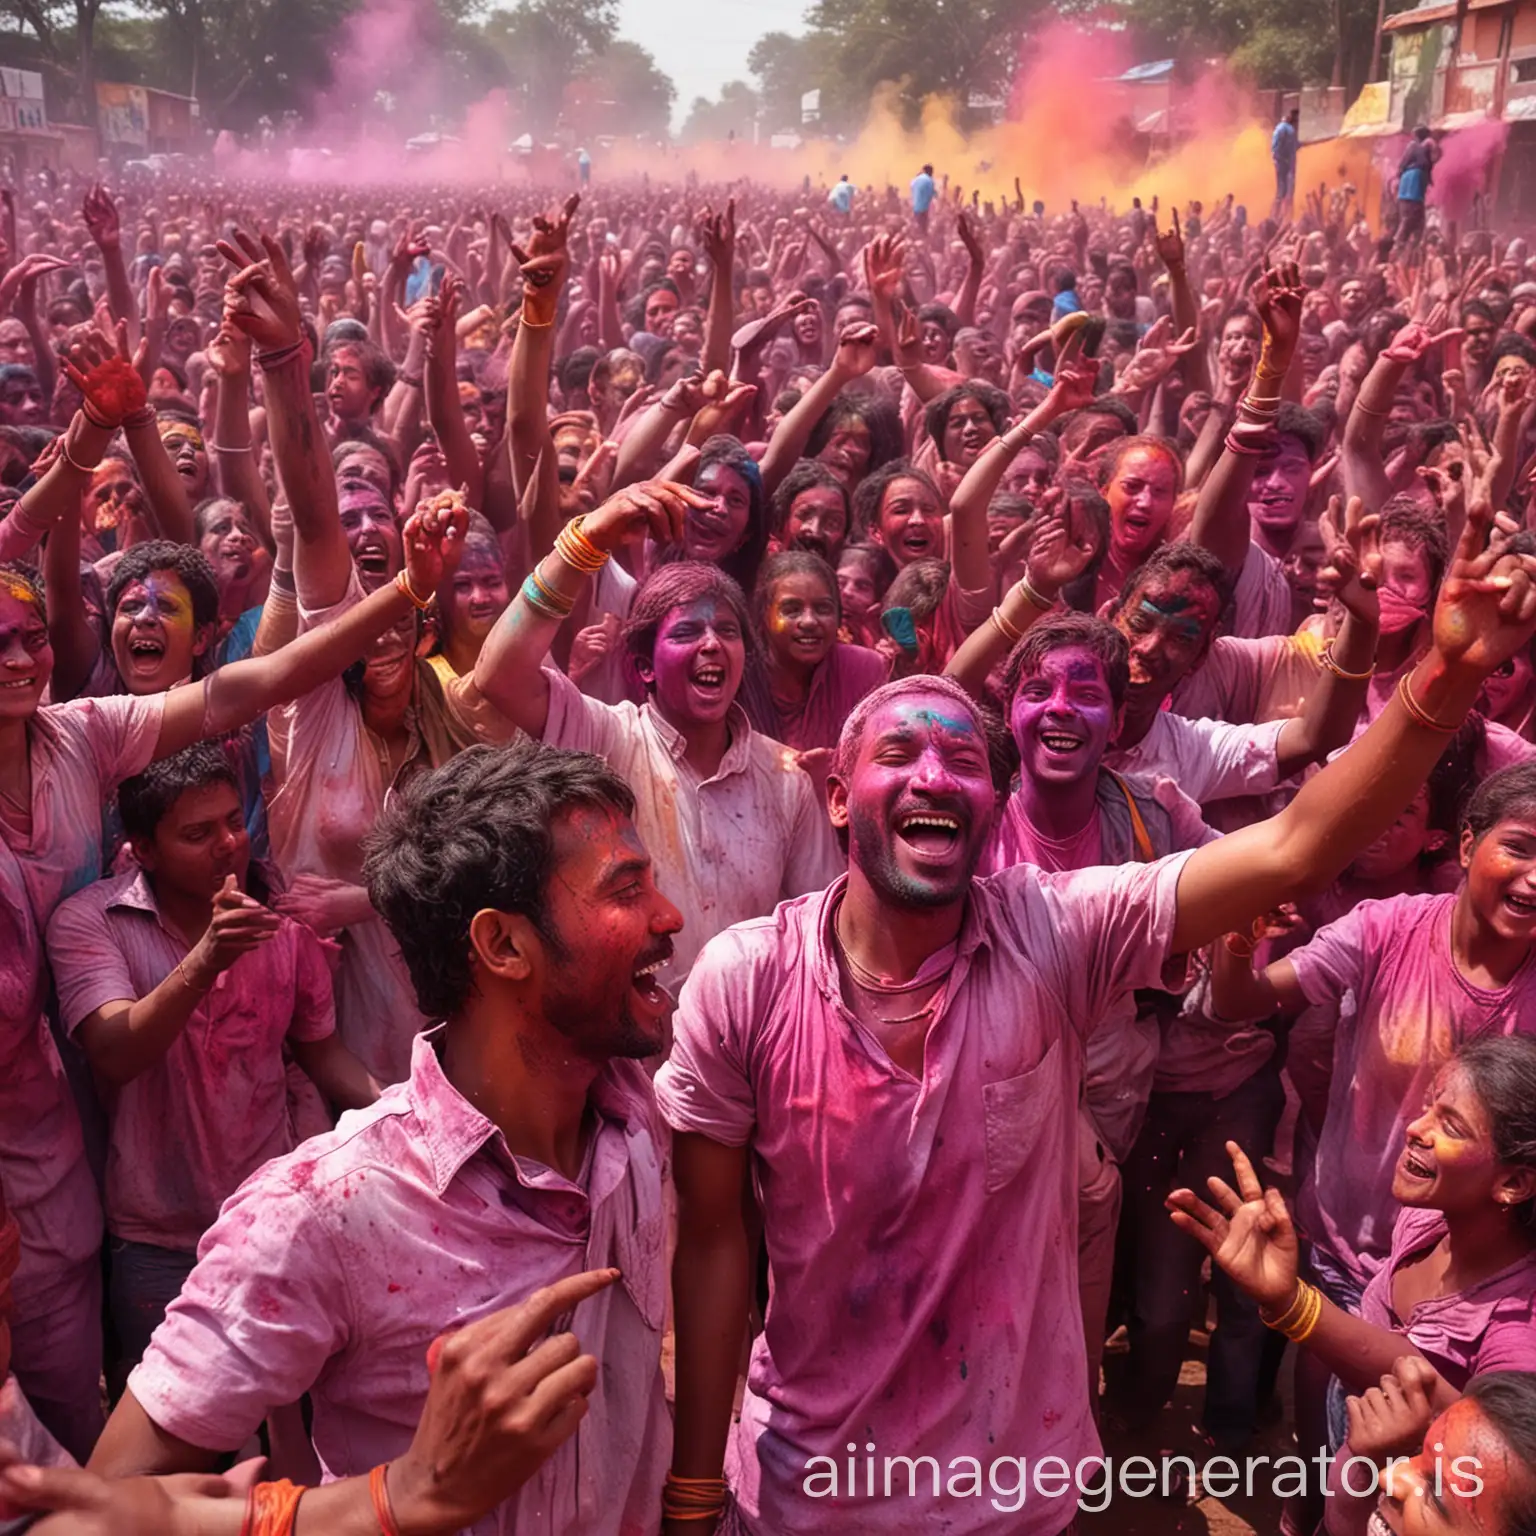 India Holi festival for the first time is getting hosted in Ethiopia. Make professional posters ads showing people enjoying and having fun.